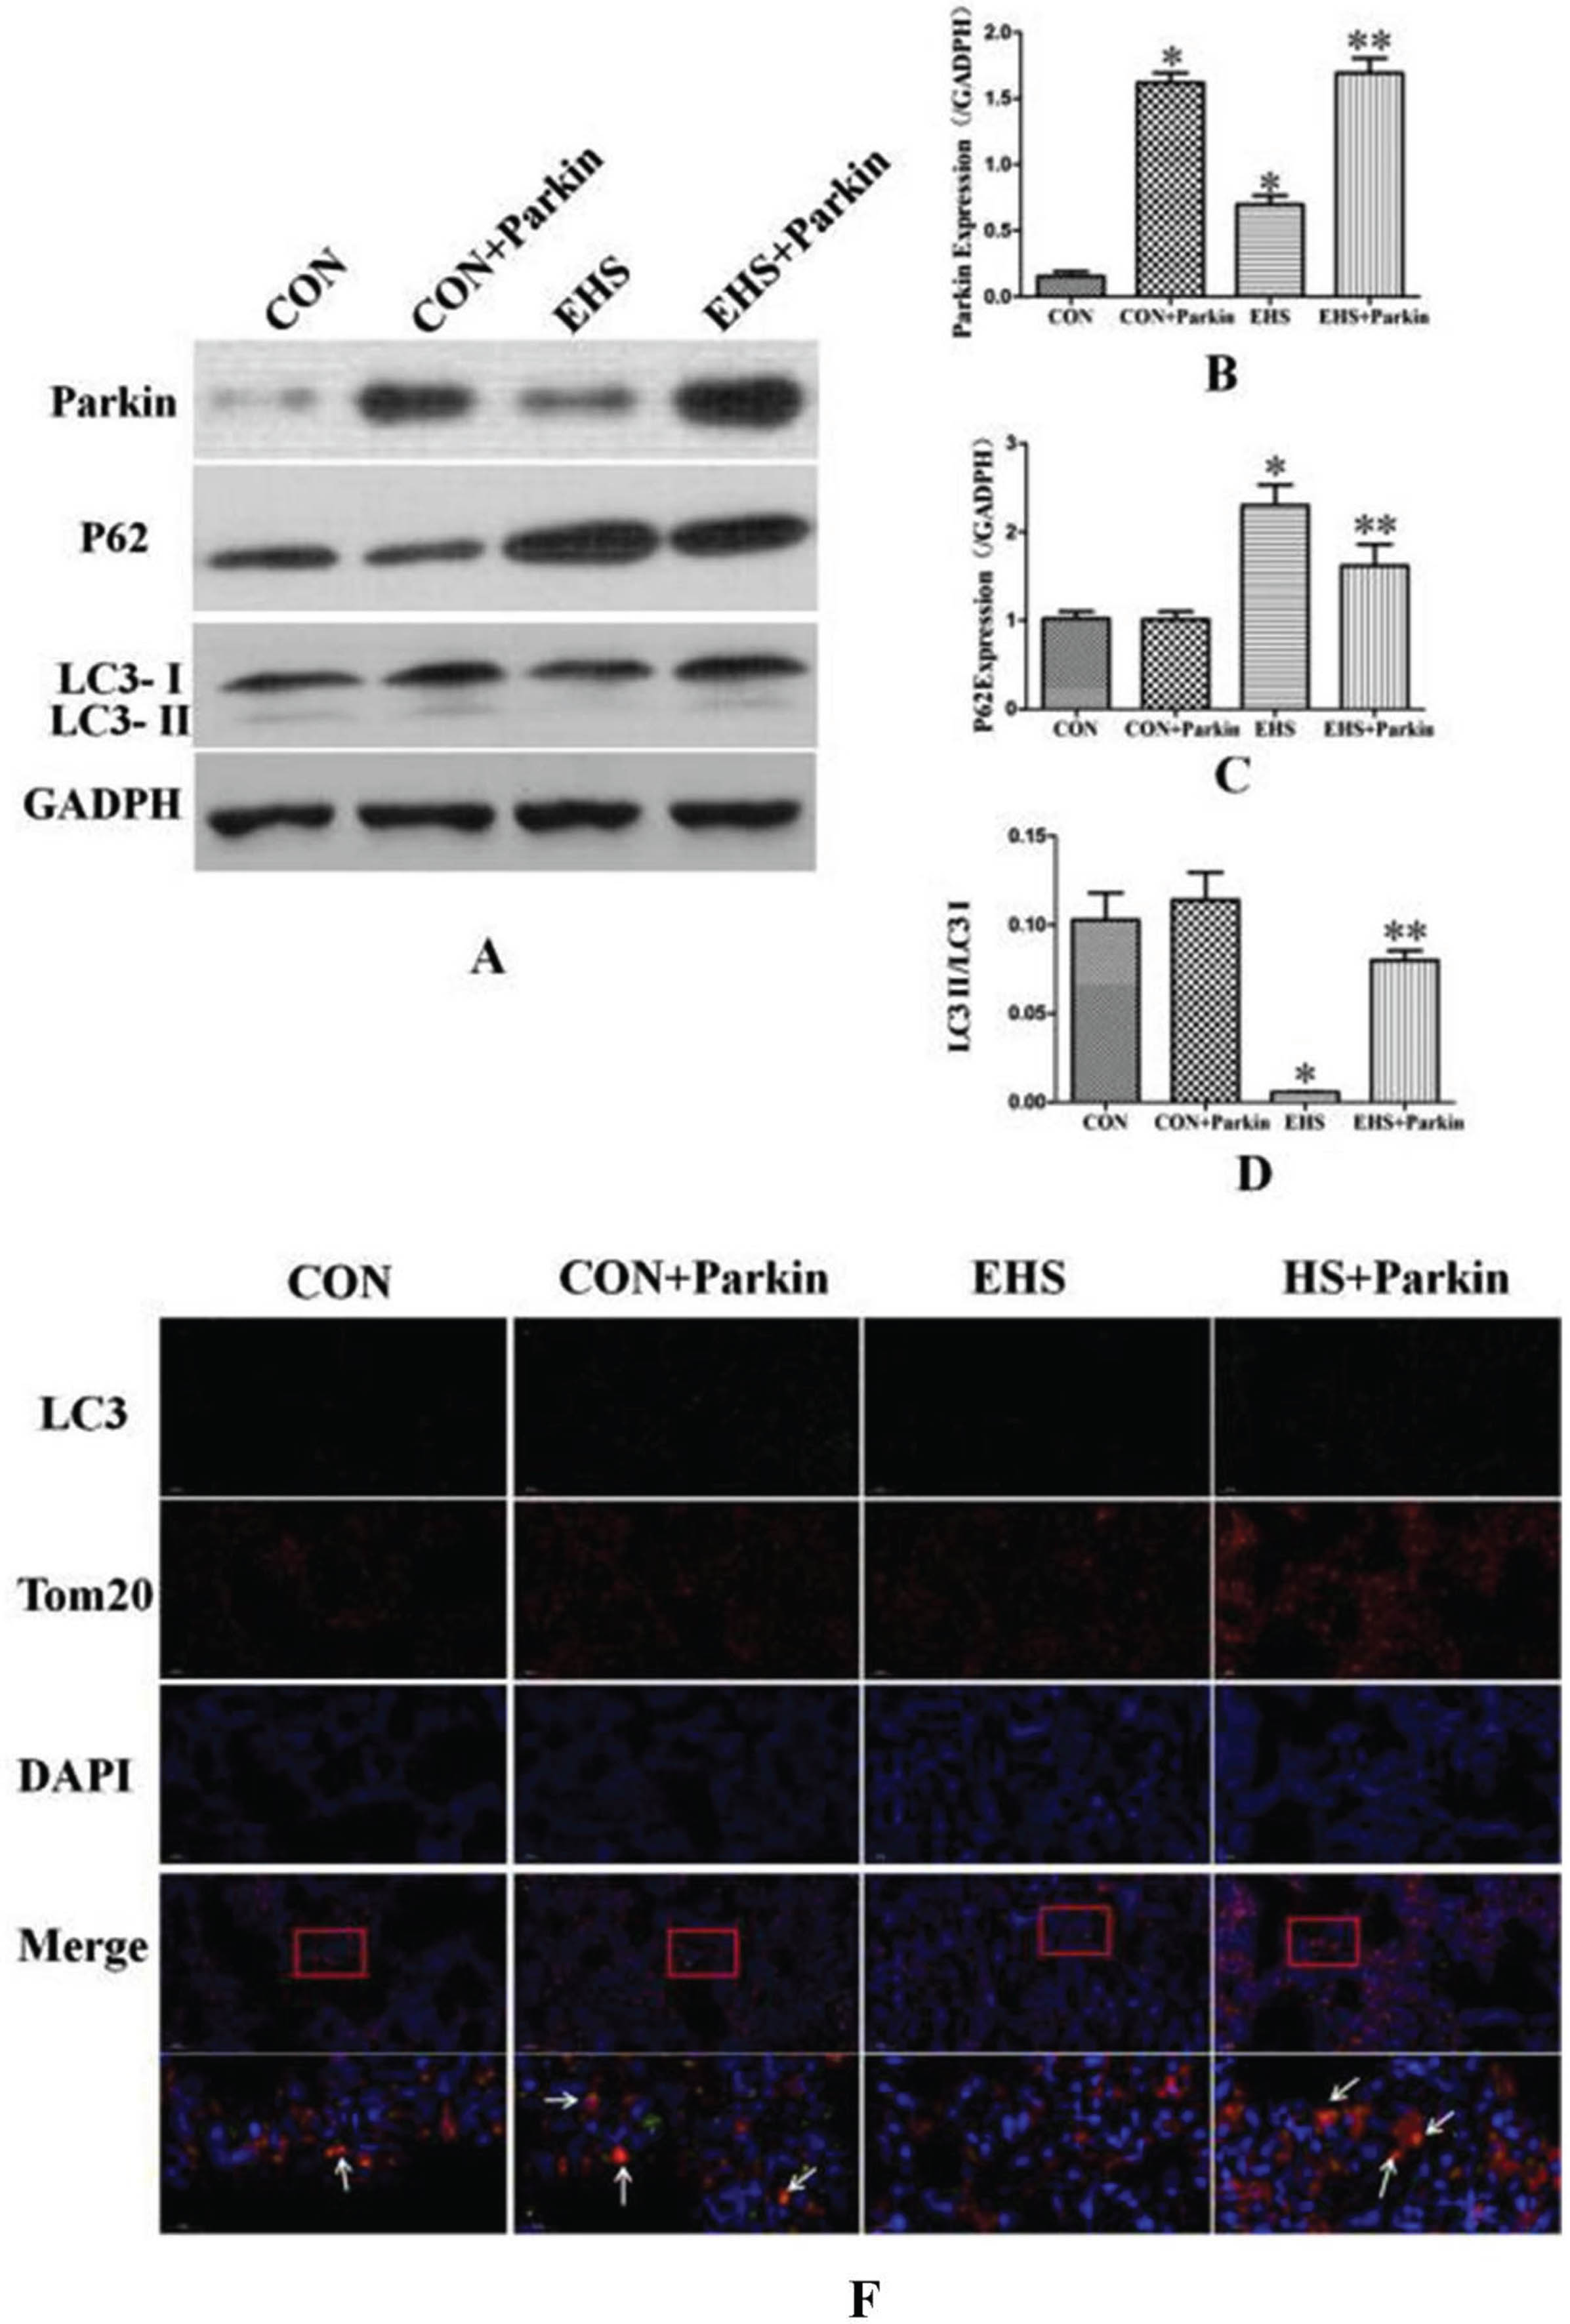 Parkin over-expression rats exhibited an increasing level of mitochondrial autophagy in their lung (N = 5). A: The protein levels of Parkin, P62, and LC3 in lung tissues were performed by immunoblotting. B-D: The statistical analysis of Parkin, P62 expression and LC3-I/LC3-IIratio. *P < 0.05 vs Control group; **P < 0.05 vs EHS group. E: Immunofluorescence staining against LC3 and Tom 20 was performed and observed by fluorescent microscopy. LC3 (green), Tom20 (red), The co-staining (orange) of LC3 and Tom 20 was showed by a white arrow, bar = 50μm.